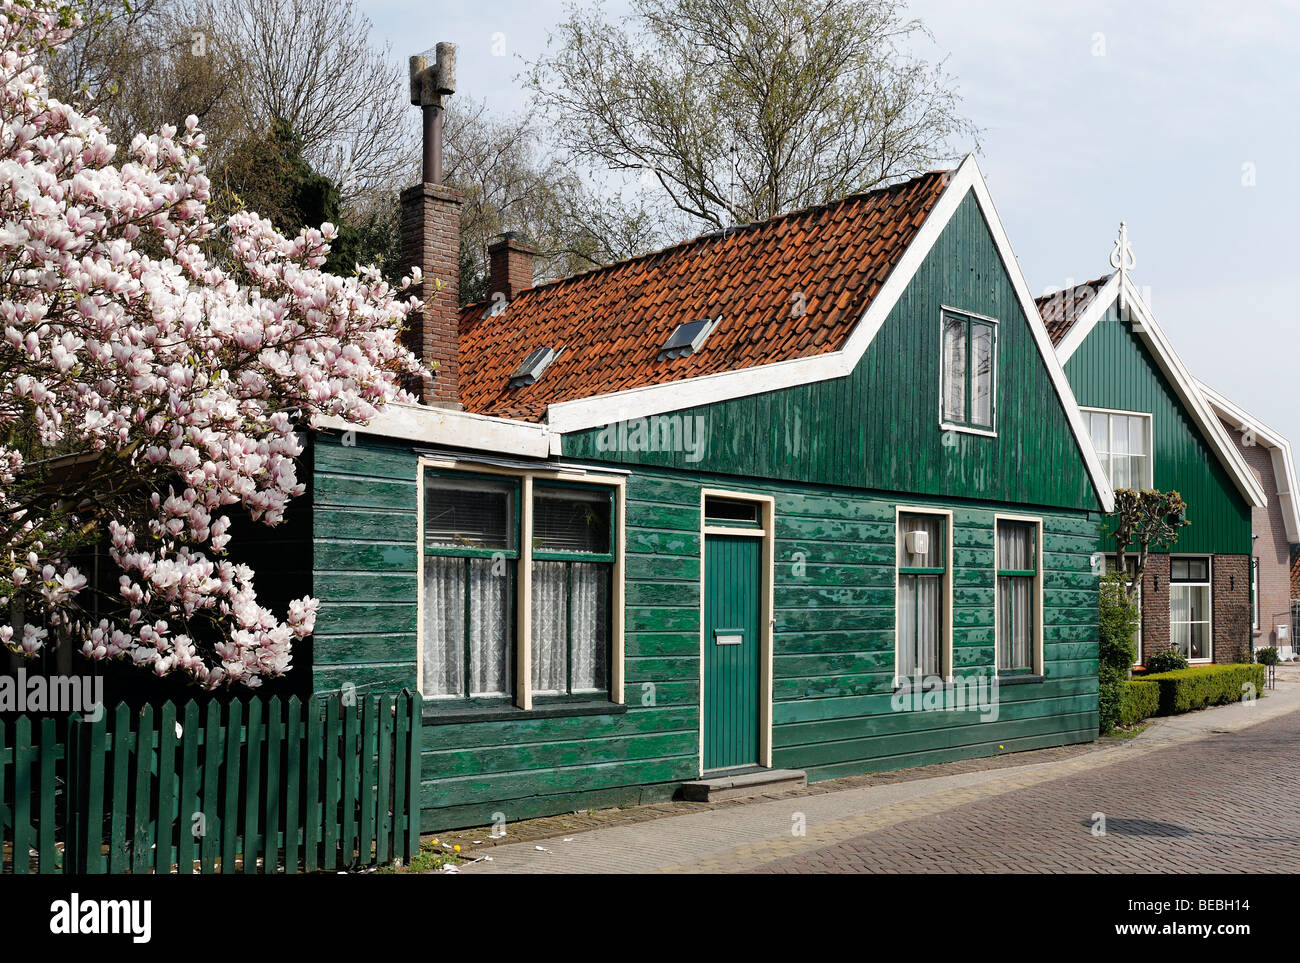 Typical wooden buildings from the 17th Century, old whaling village Jisp, Wormerland, province of North Holland, Netherlands, E Stock Photo